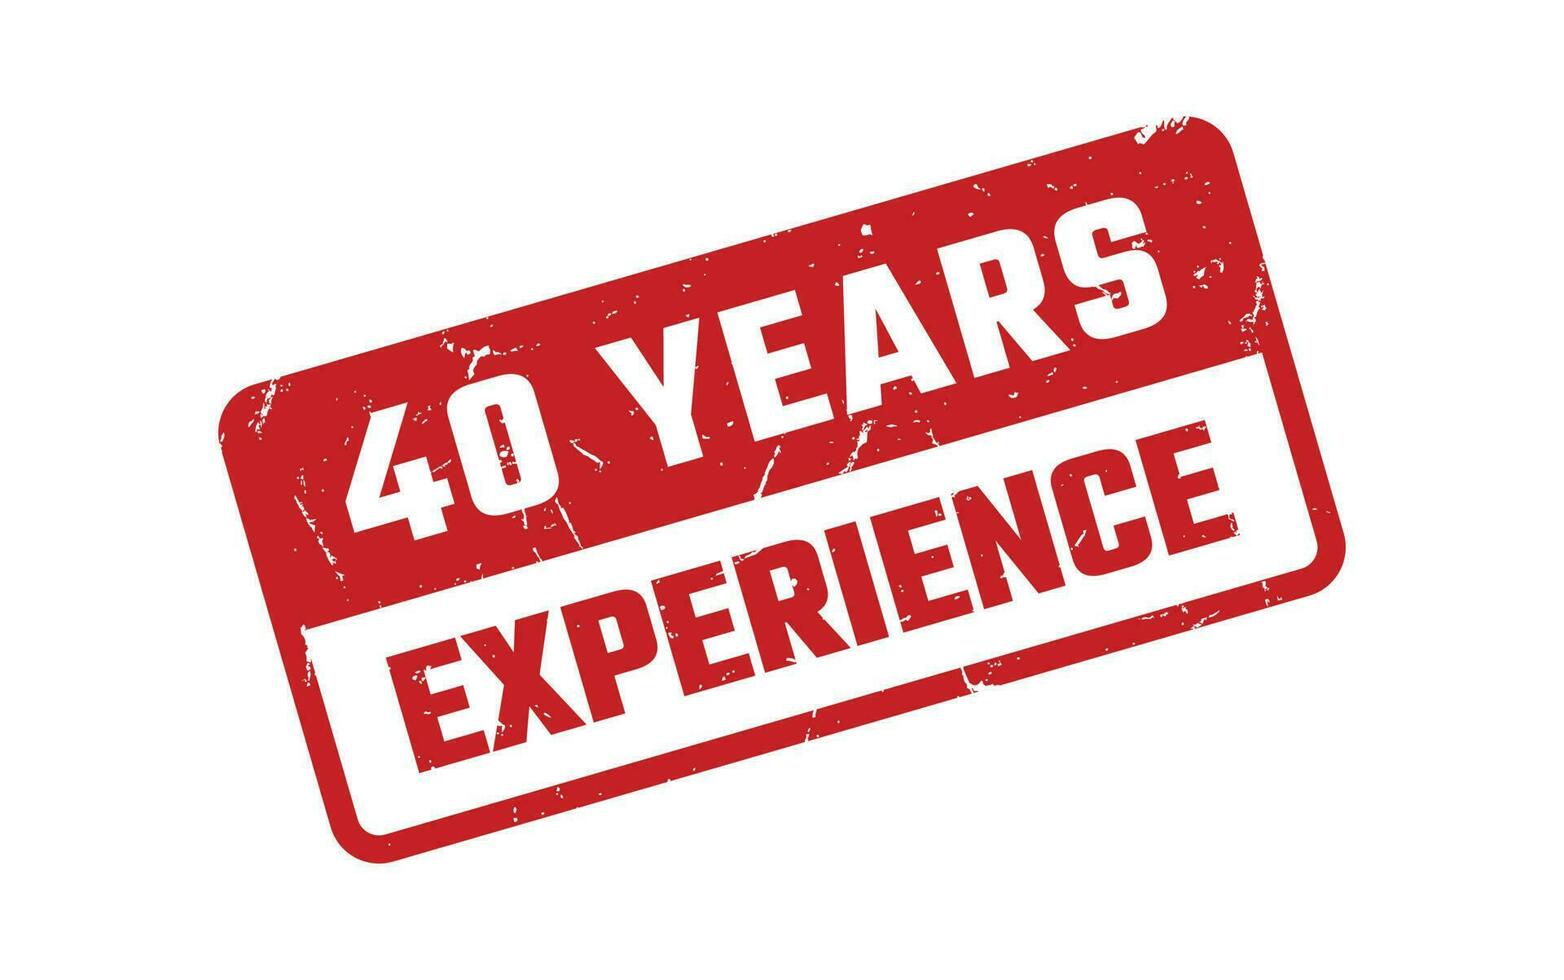 40 Years Experience Rubber Stamp vector